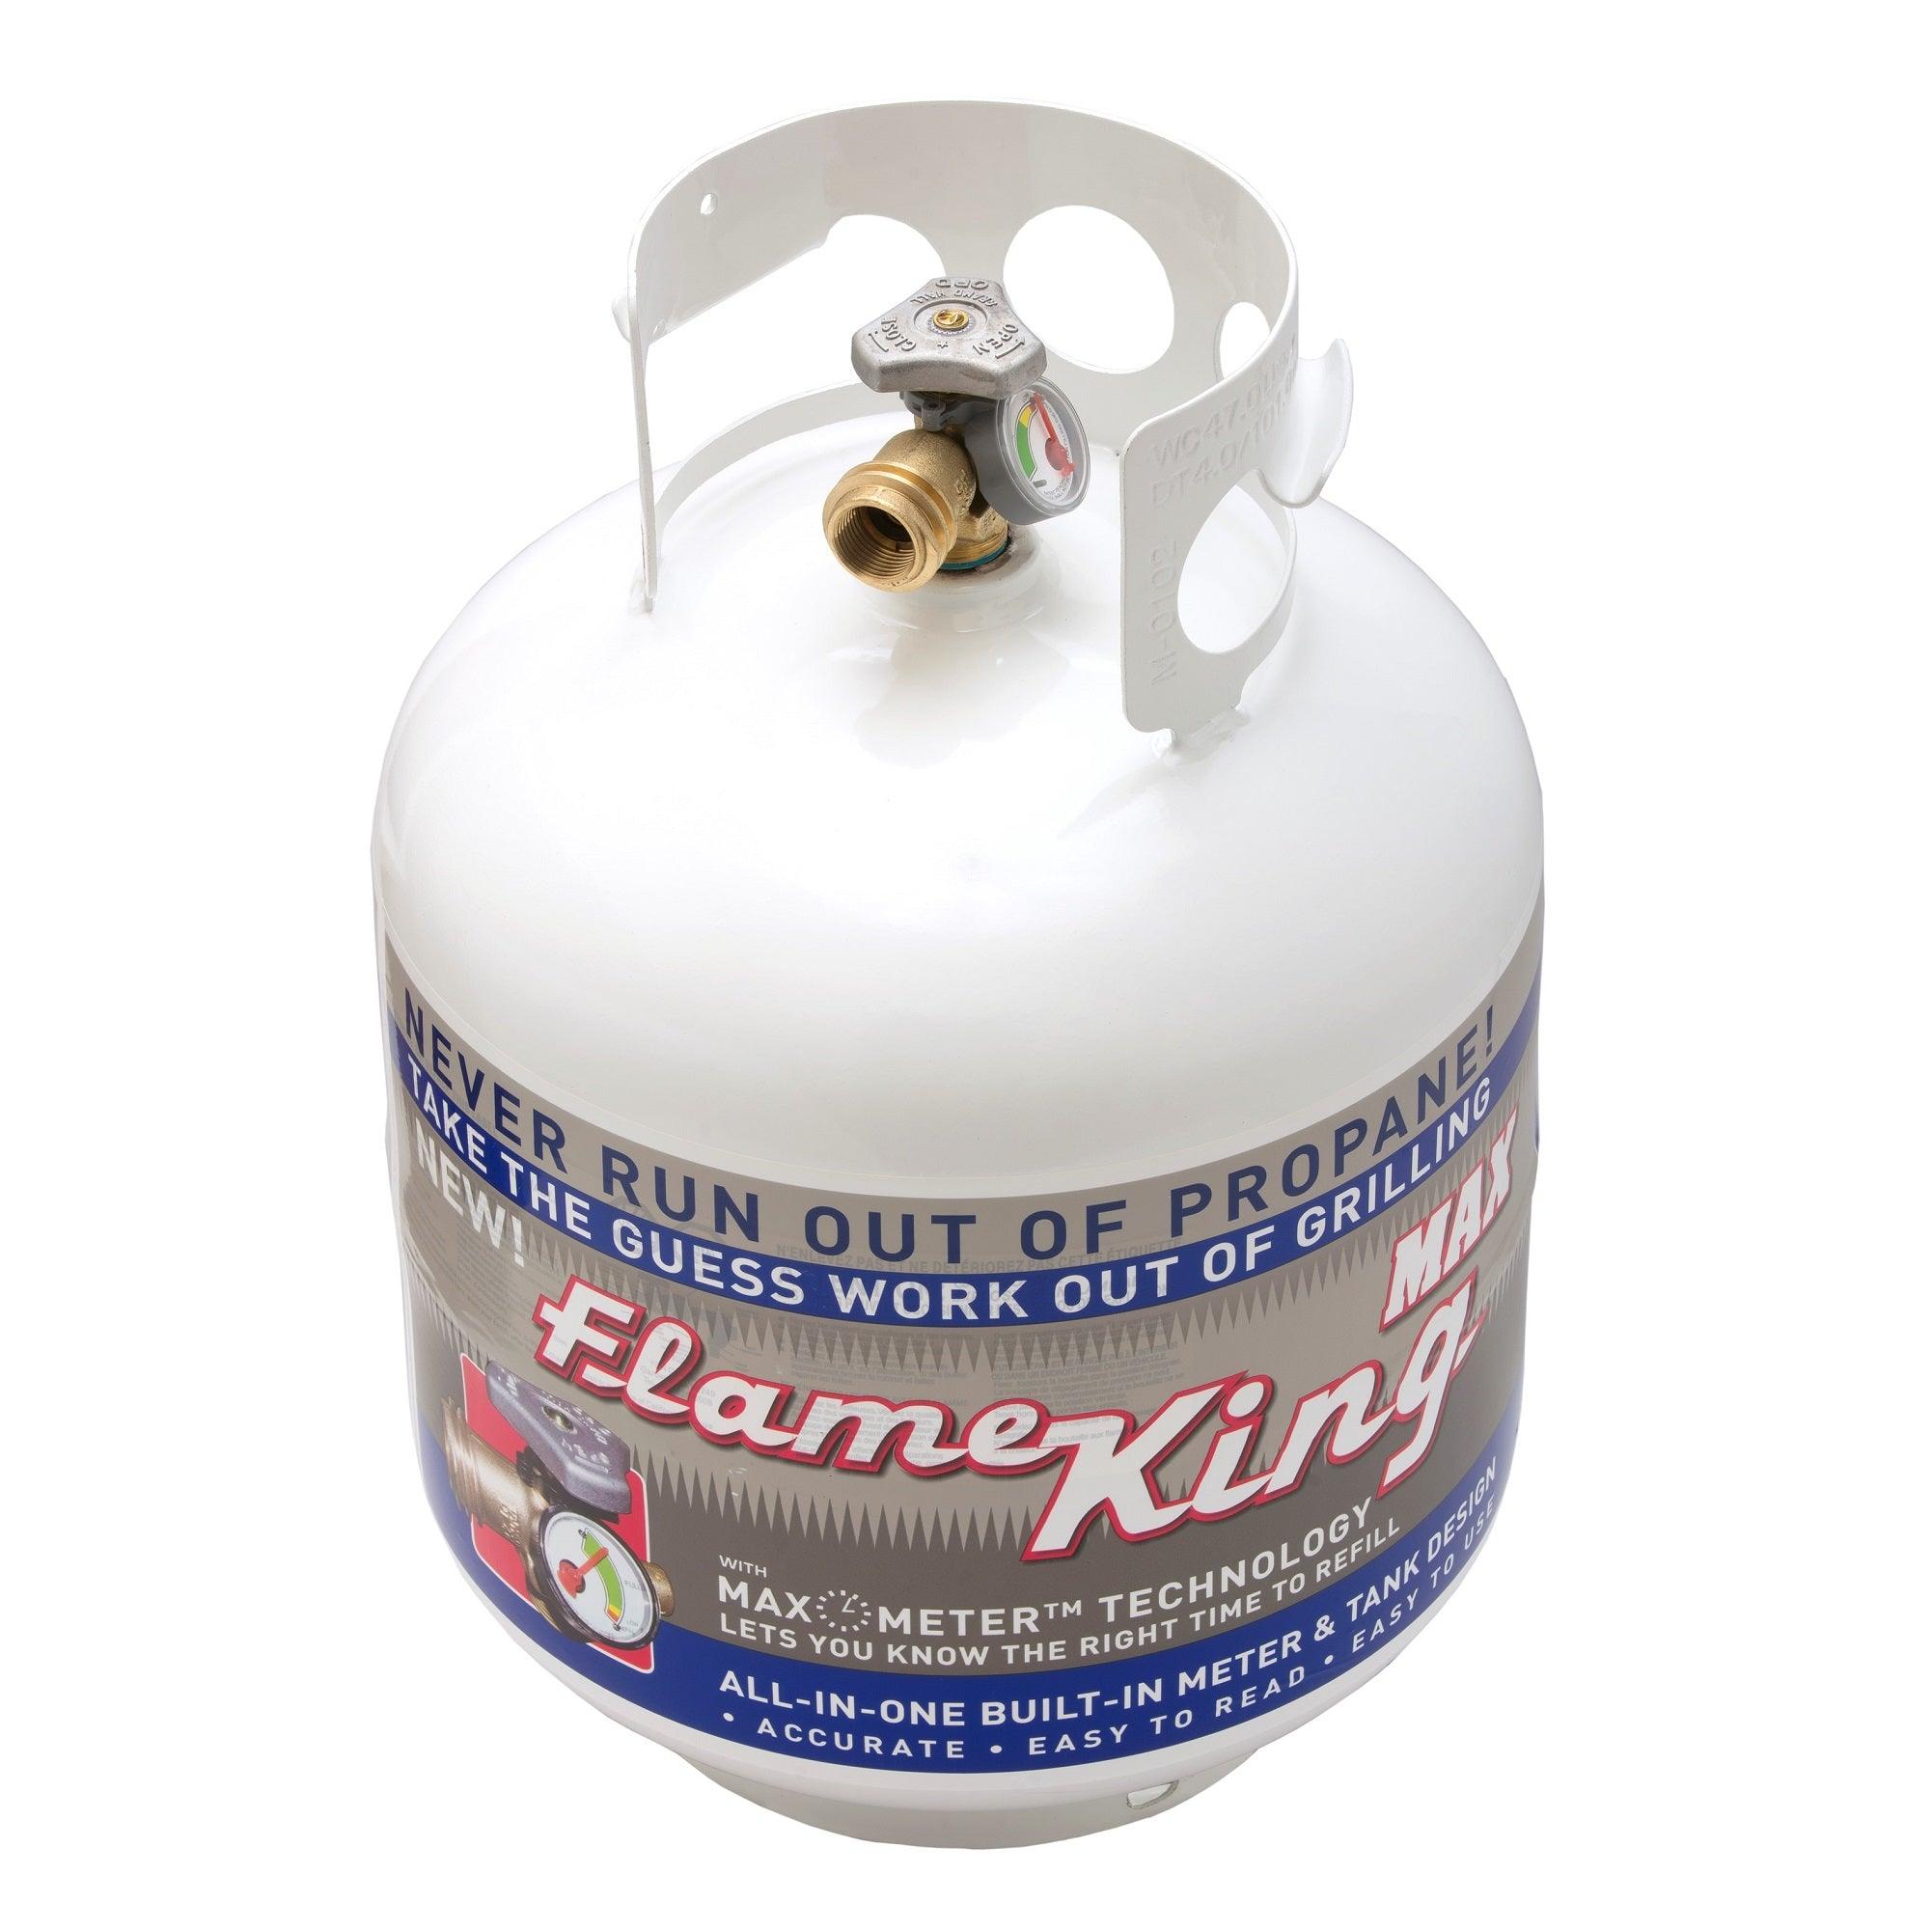 Flame King 20lb Propane Tank LP Cylinder with OPD & Gauge - Flame King